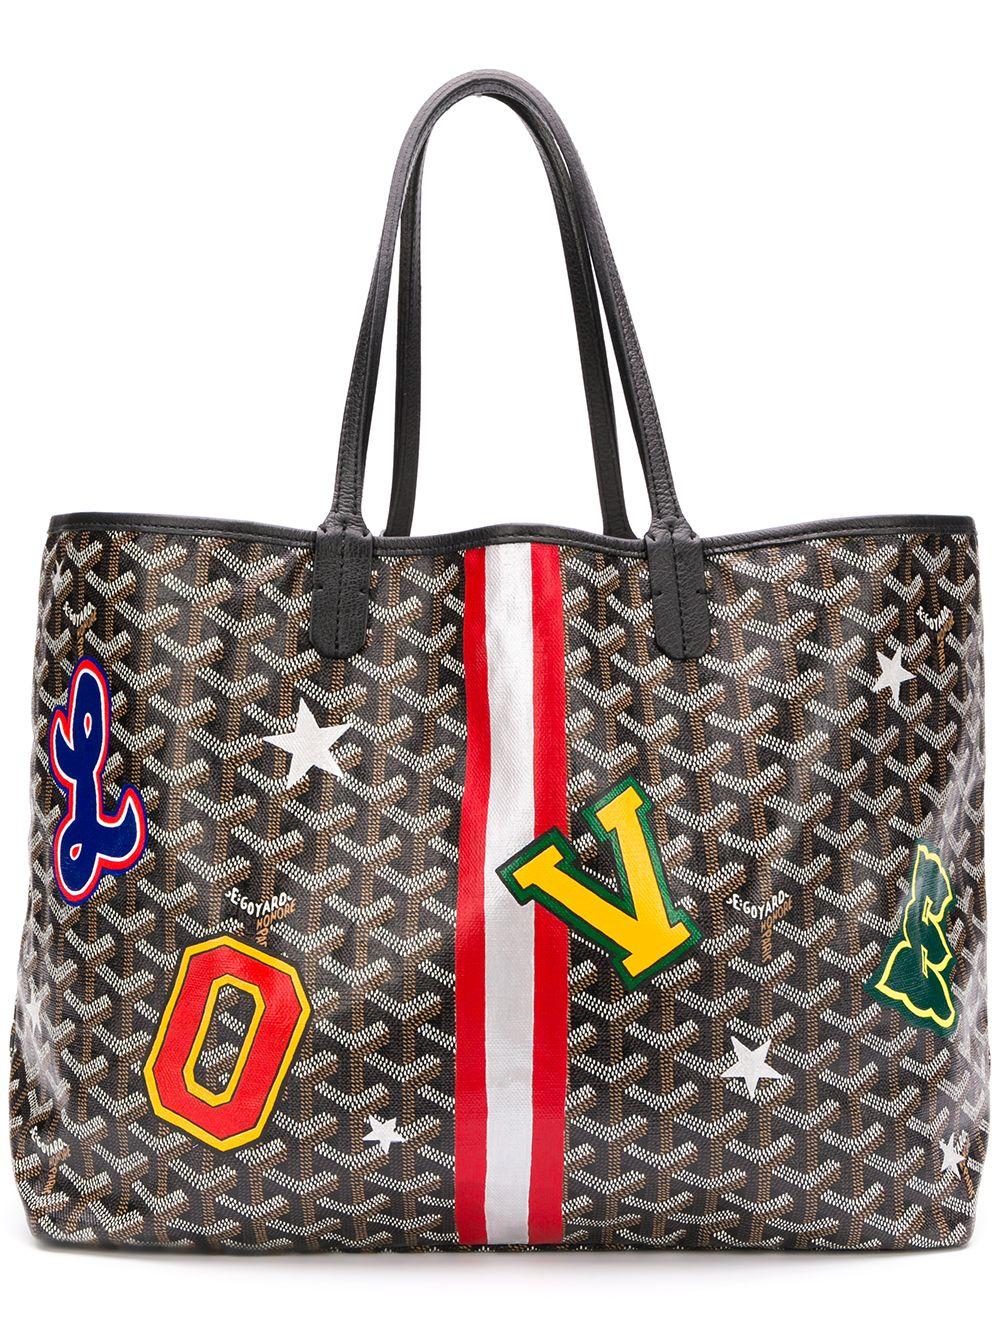 Goyard Leather Patches Print Tote Bag in Black | Lyst